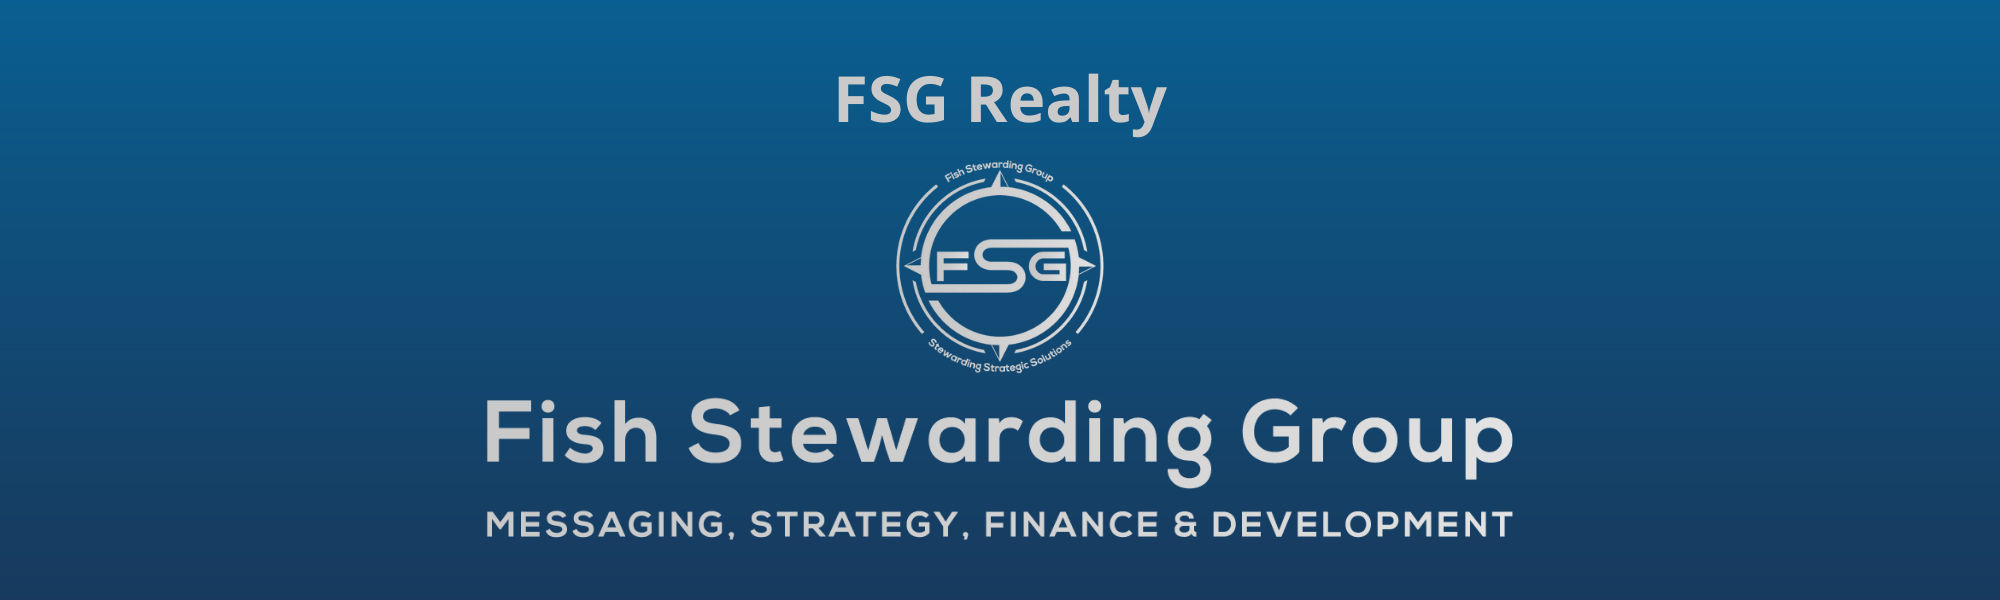 A thin rectangular Footer graphic for the FSG Realty page. The background is a blue gradient color that goes from a dark blue on the bottom to a lighter blue on top. The text in gray on top reads FSG Realty. The text in gray on the bottom center reads: Fish Stewarding Group and beneath that, the text reads Messaging, Strategy, Finance and Development. In the center above the text is the FSG logo in gray. The logo has the letters FSG in the middle with a circle with four pointed arrows facing north, south, east and west with the S connected to that circle. Four rounded lines make the next circle of the circle and the last layer is a thin circle with the text on the Bottom that reads Stewarding Strategist Solutions and on top, the text reads Fish Stewarding Group.